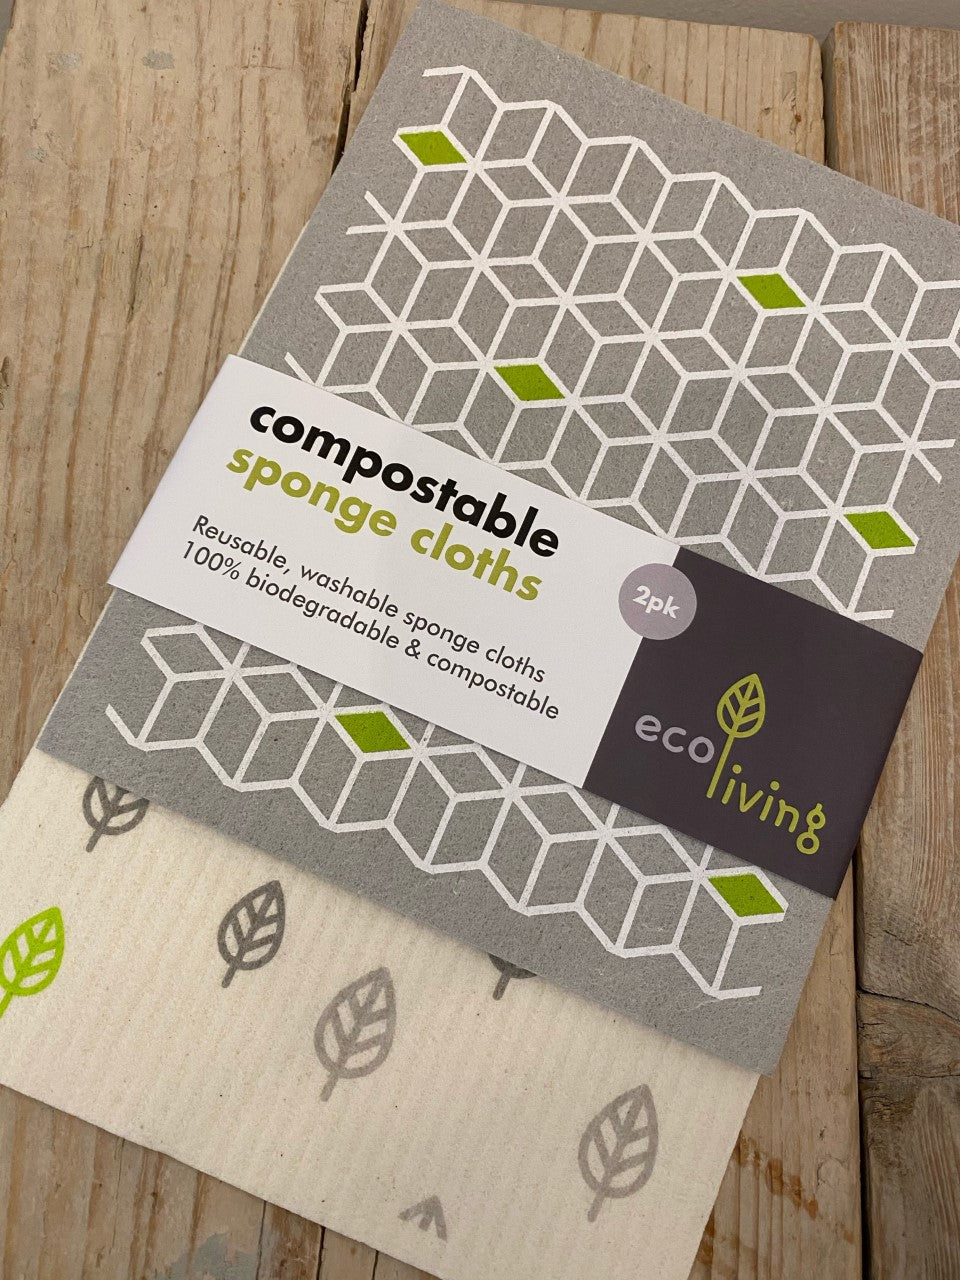 eco living - compostable sponge cleaning cloths (2 pack)